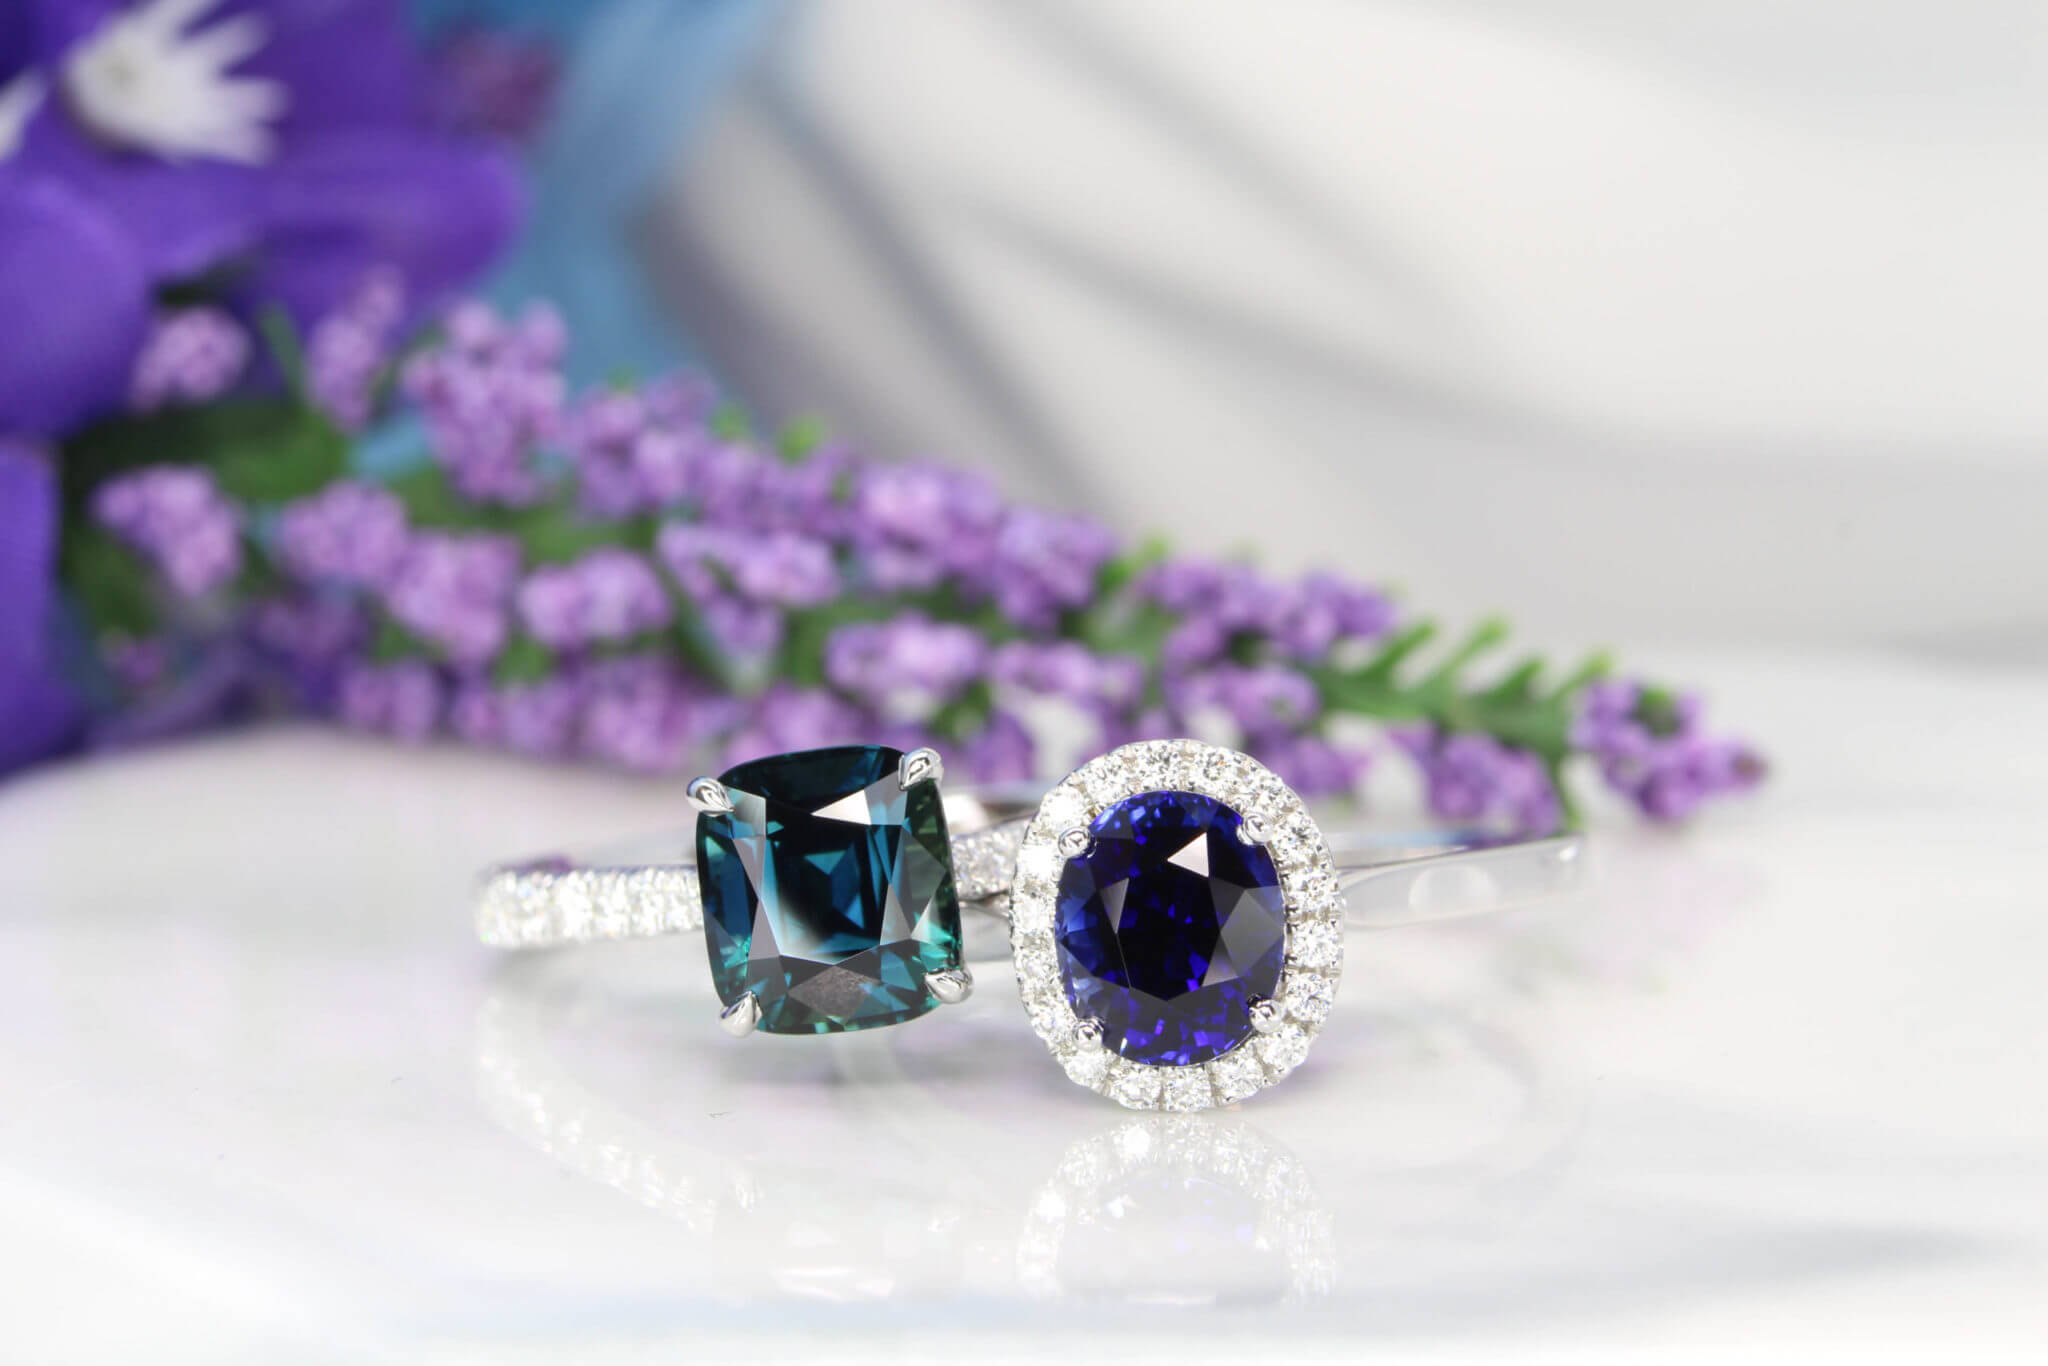 Modern Heirloom Jewellery customised with royal blue sapphire and teal sapphire make them a unique heirloom jewellery for generation